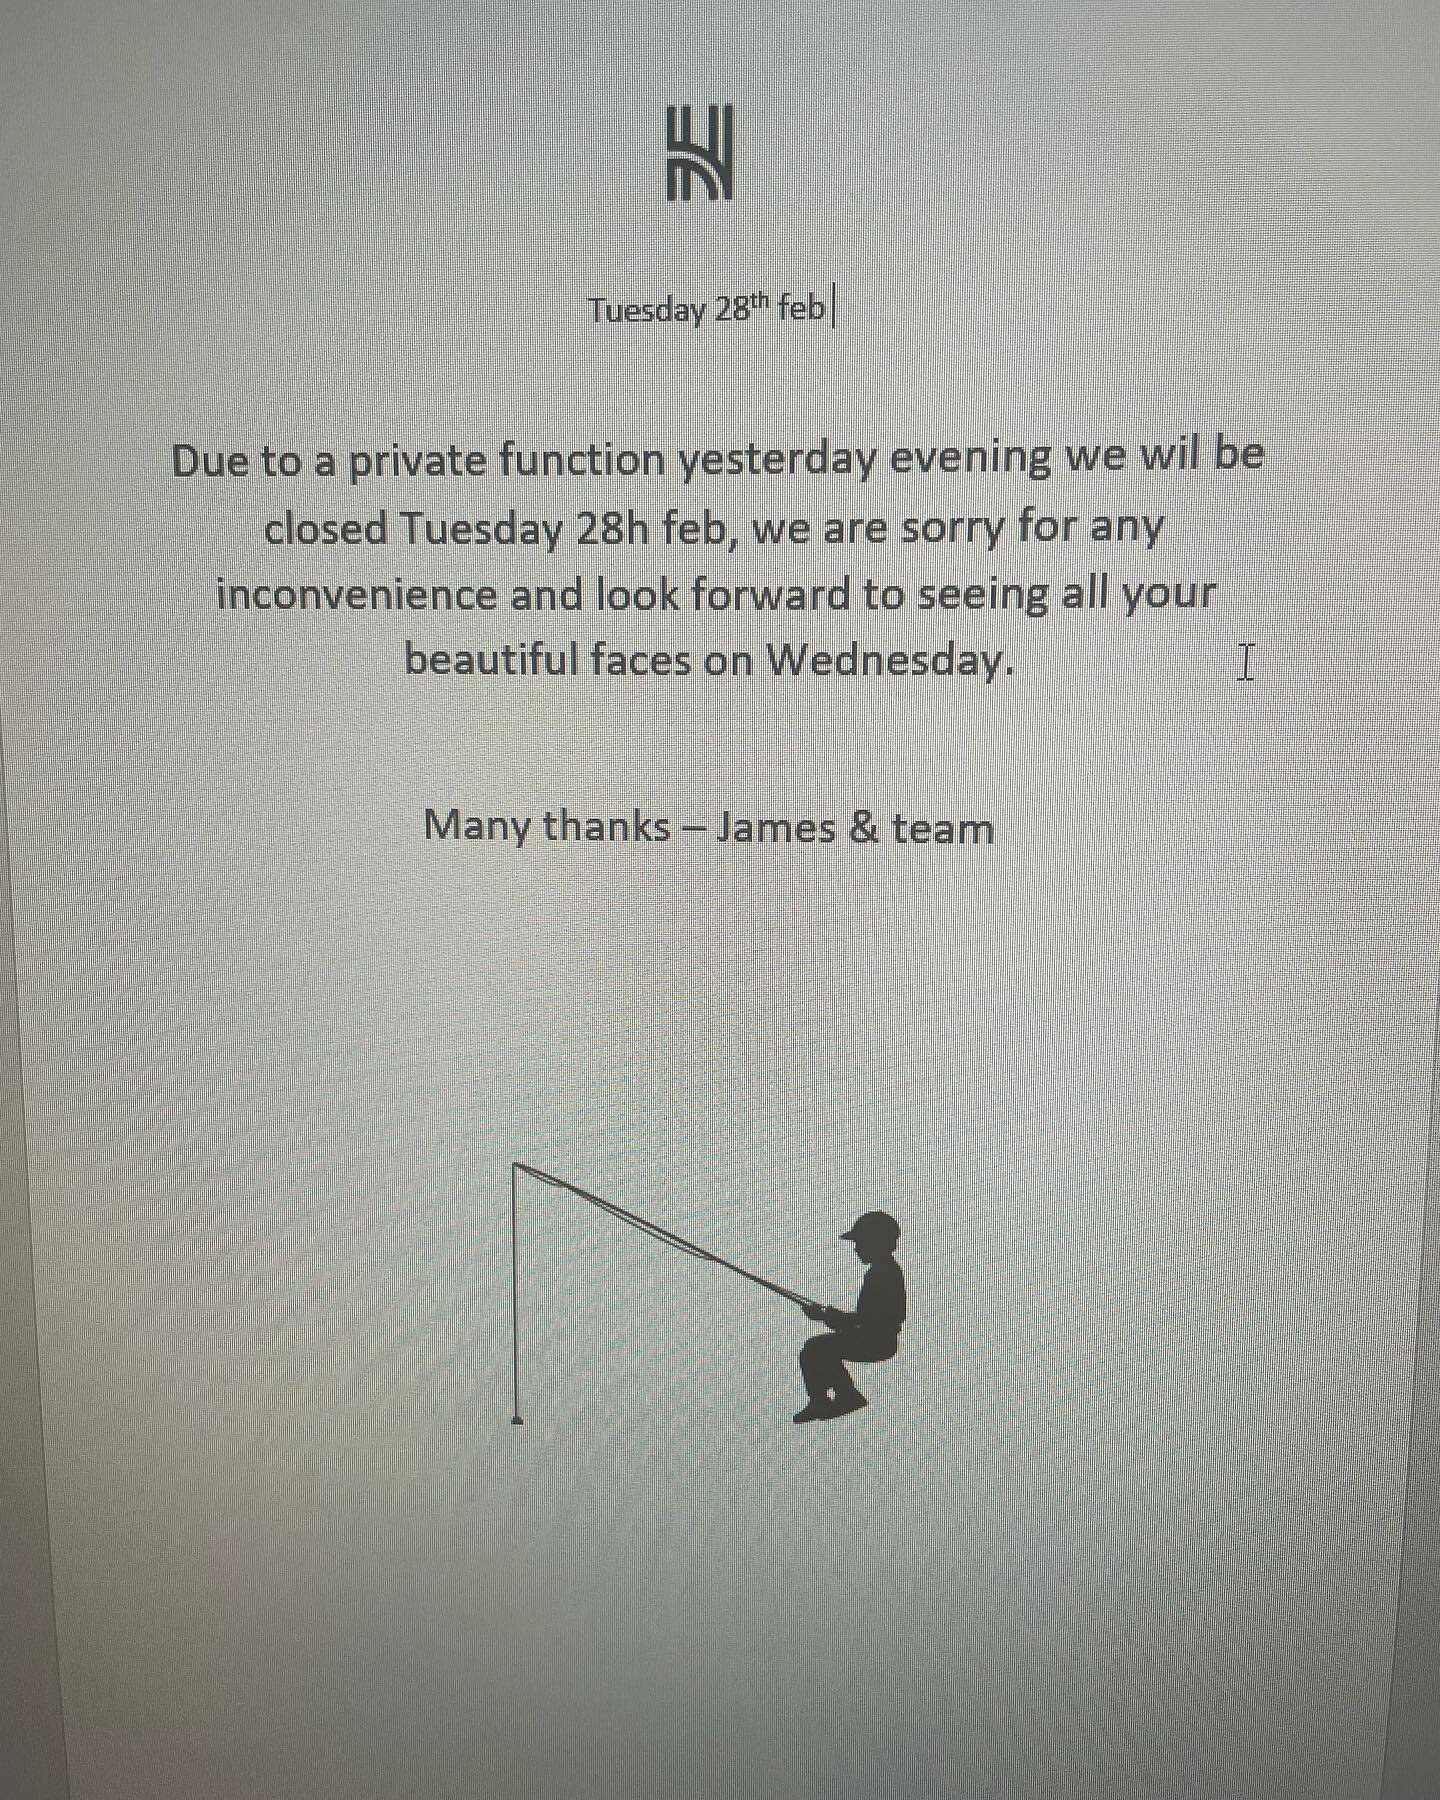 Sorry folks, we will be closed Tuesday 28th feb for the team to have a little time out after working a function on Monday evening. Look forward to seeing you all during the week - James &amp; team